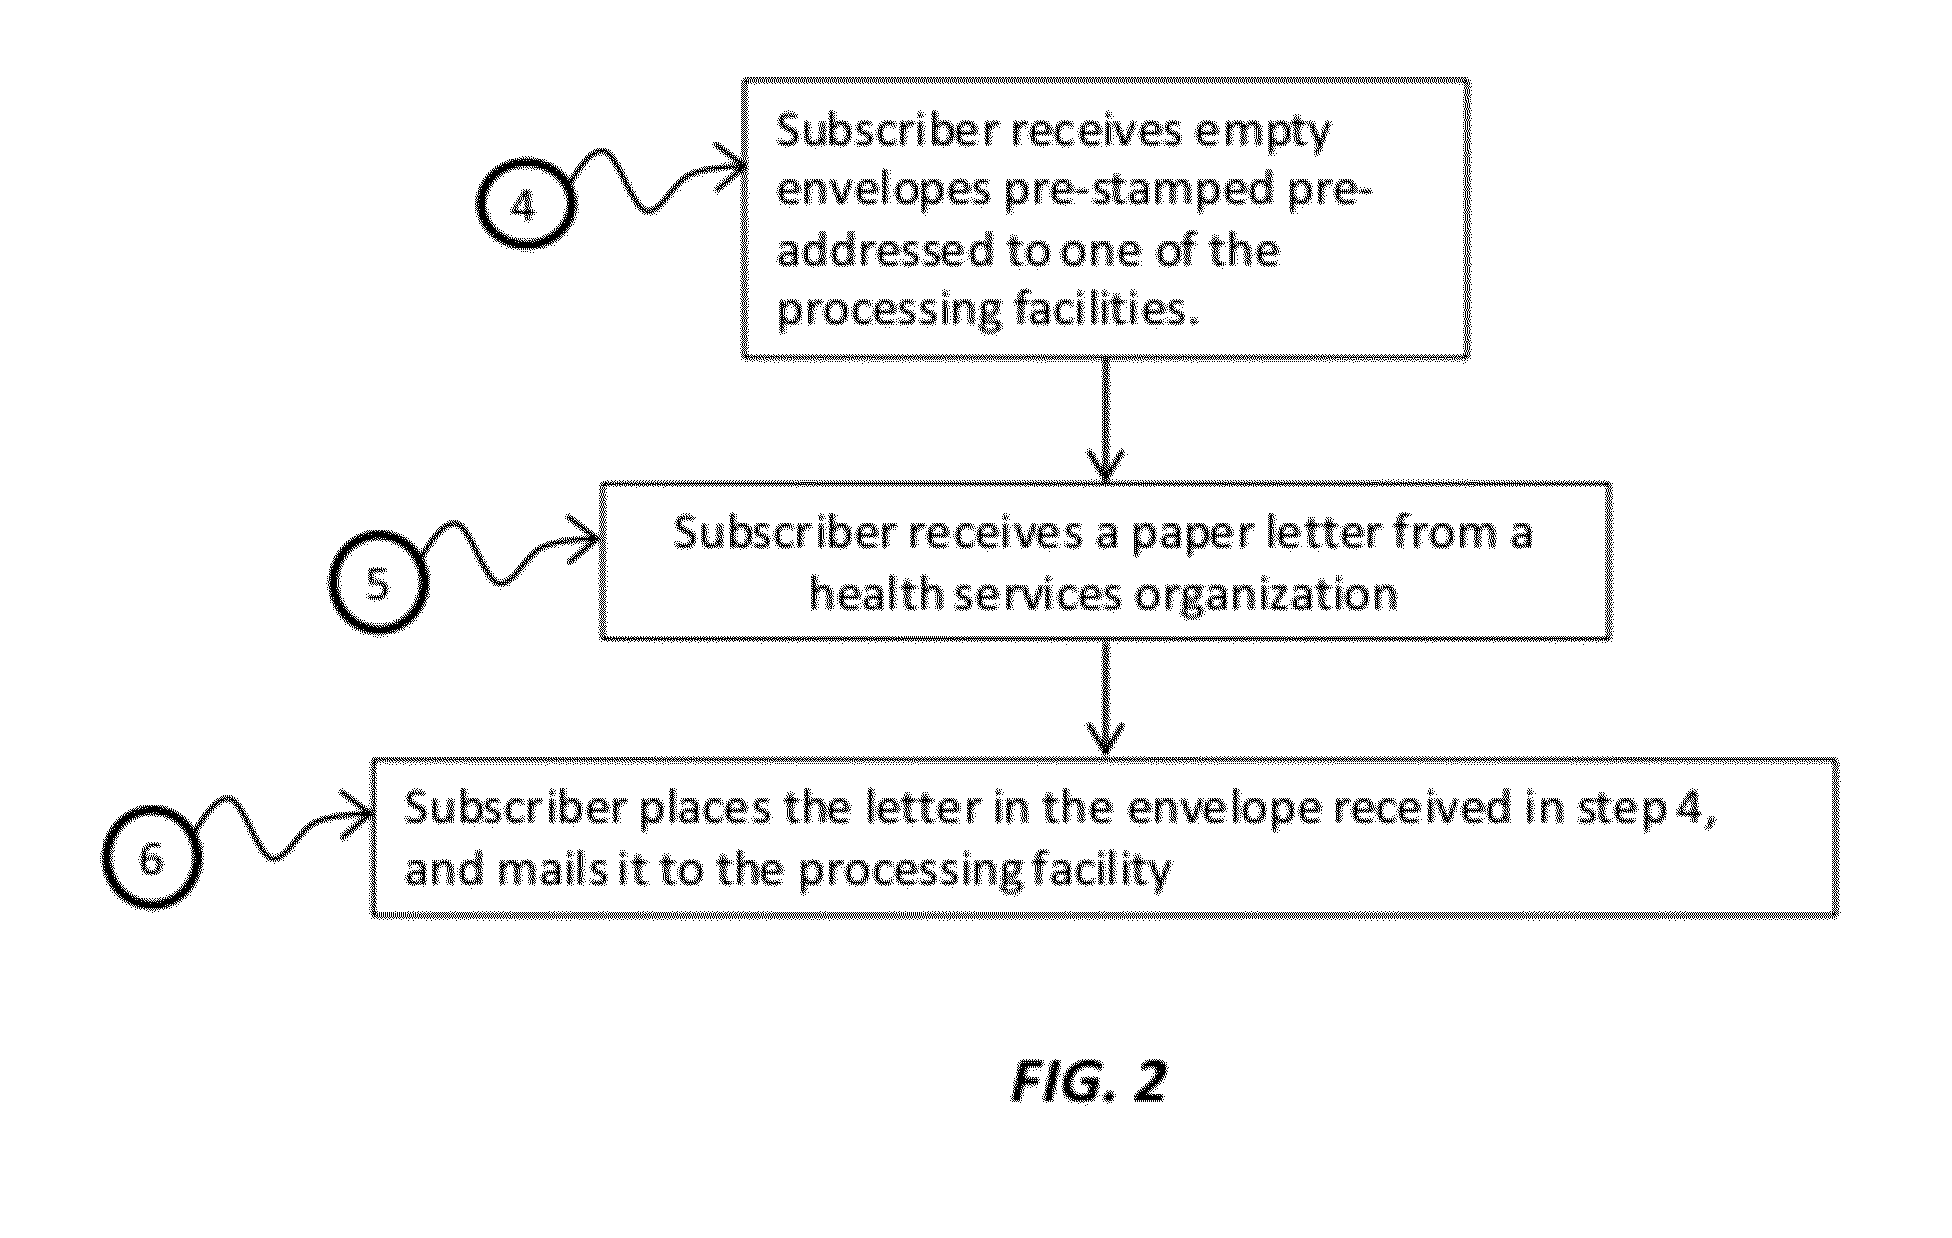 System and method of automated data analysis for implementing health records personal assistant with automated correlation of medical services to insurance and tax benefits for improved personal health cost management